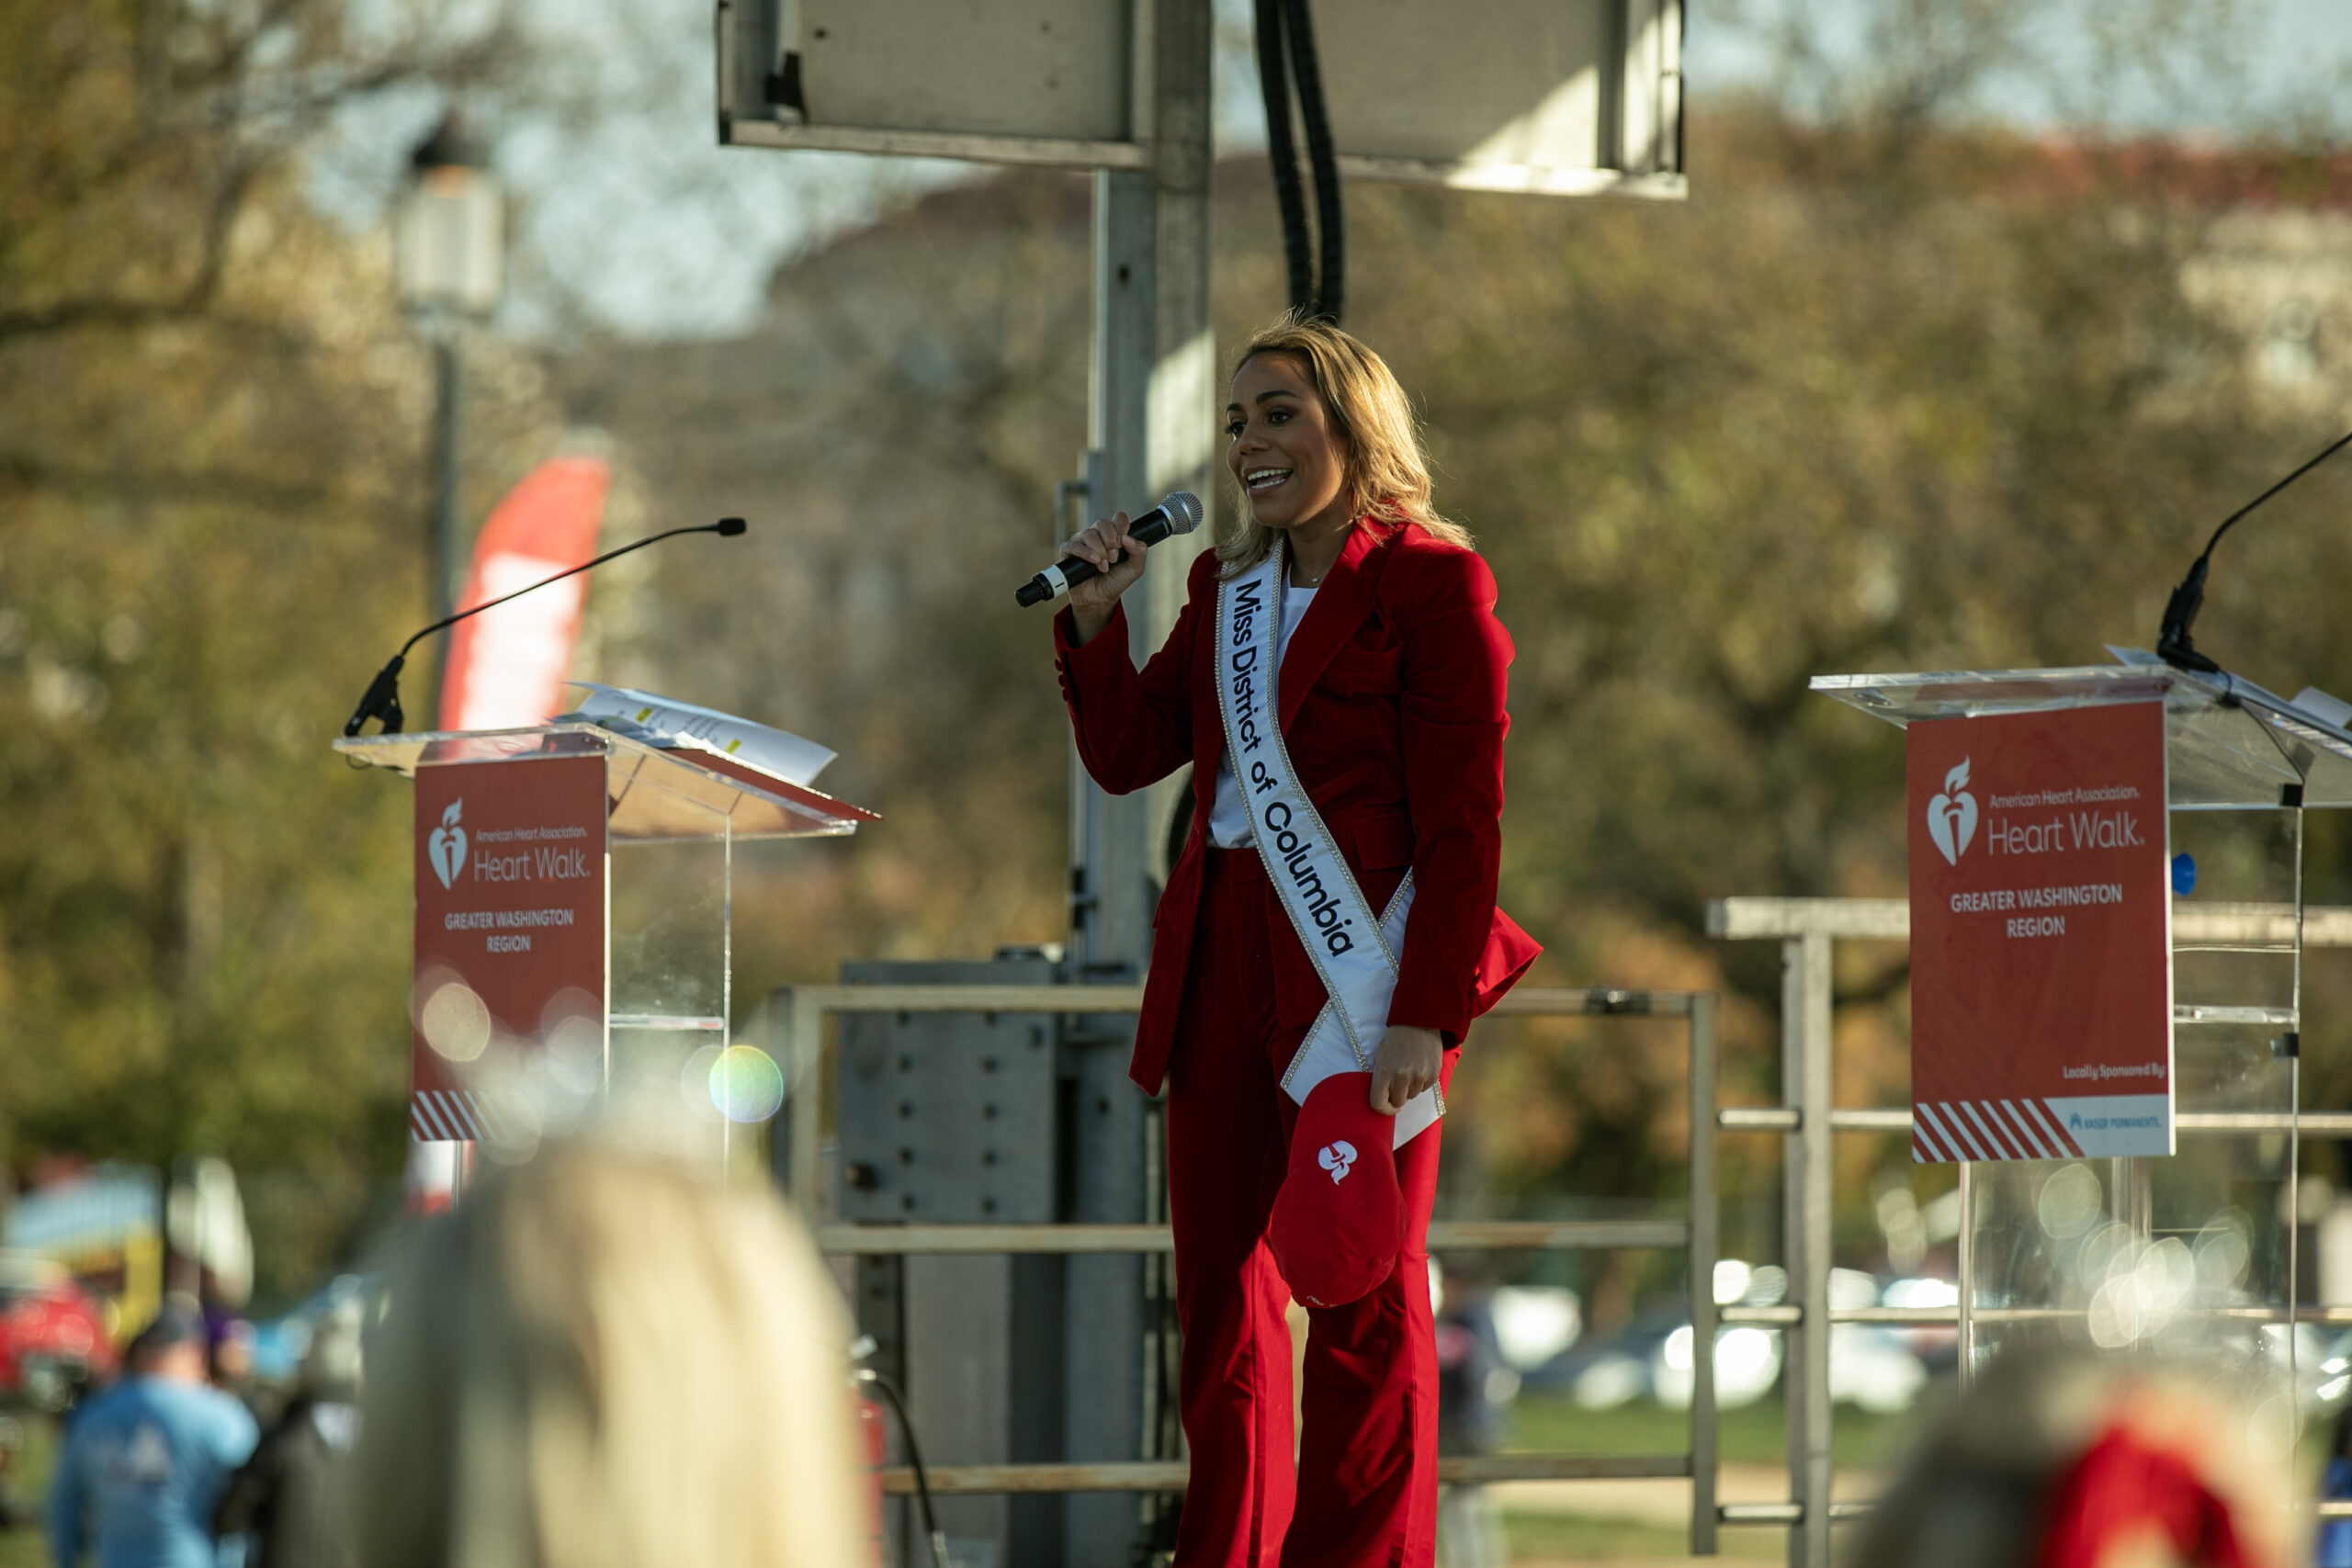 Miss District of Columbia on stage at the Heart Walk 